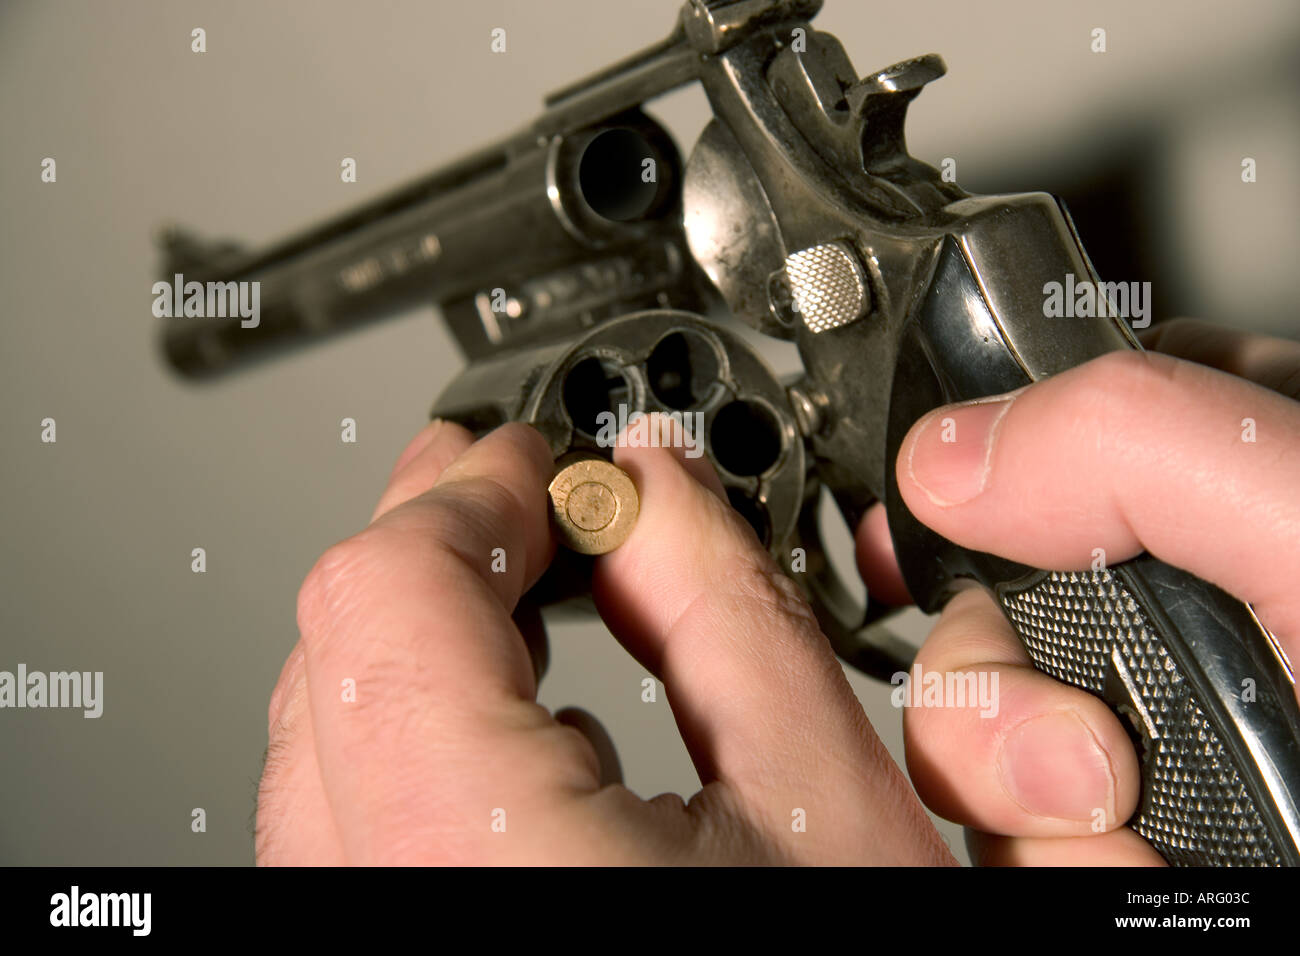 Russian Roulette gun drawing, vintage weapon illustration vector Stock  Vector Image & Art - Alamy